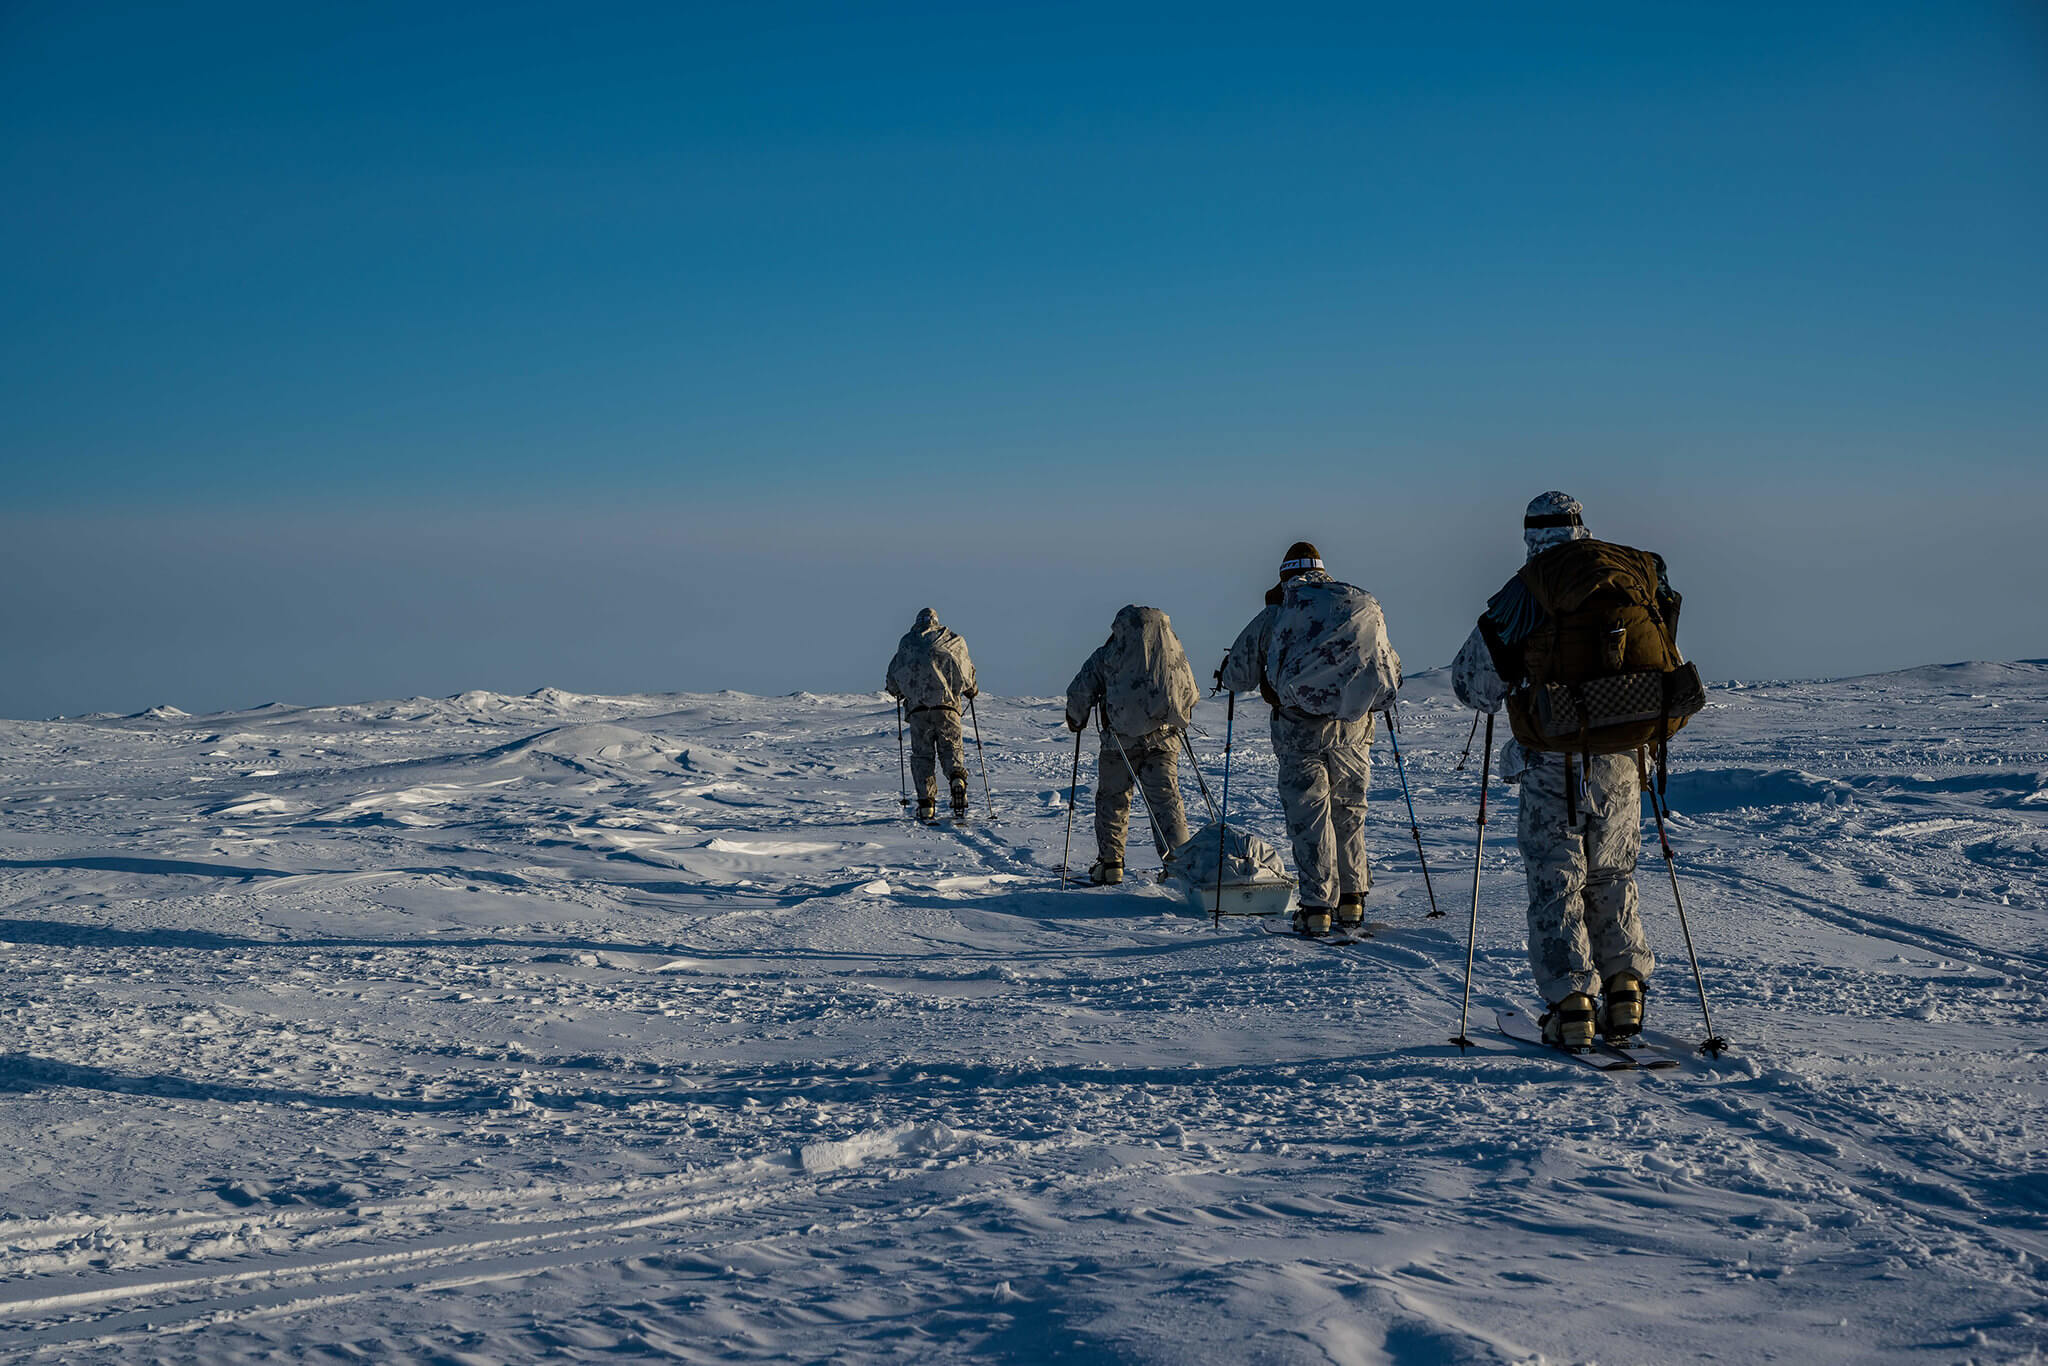 US Marines go on a ski tour outside of Ice Camp Seadragion during Ice Exercise (ICEX), Antarctica, 10 March 2020 © US Into-Pacific Command / Flickr